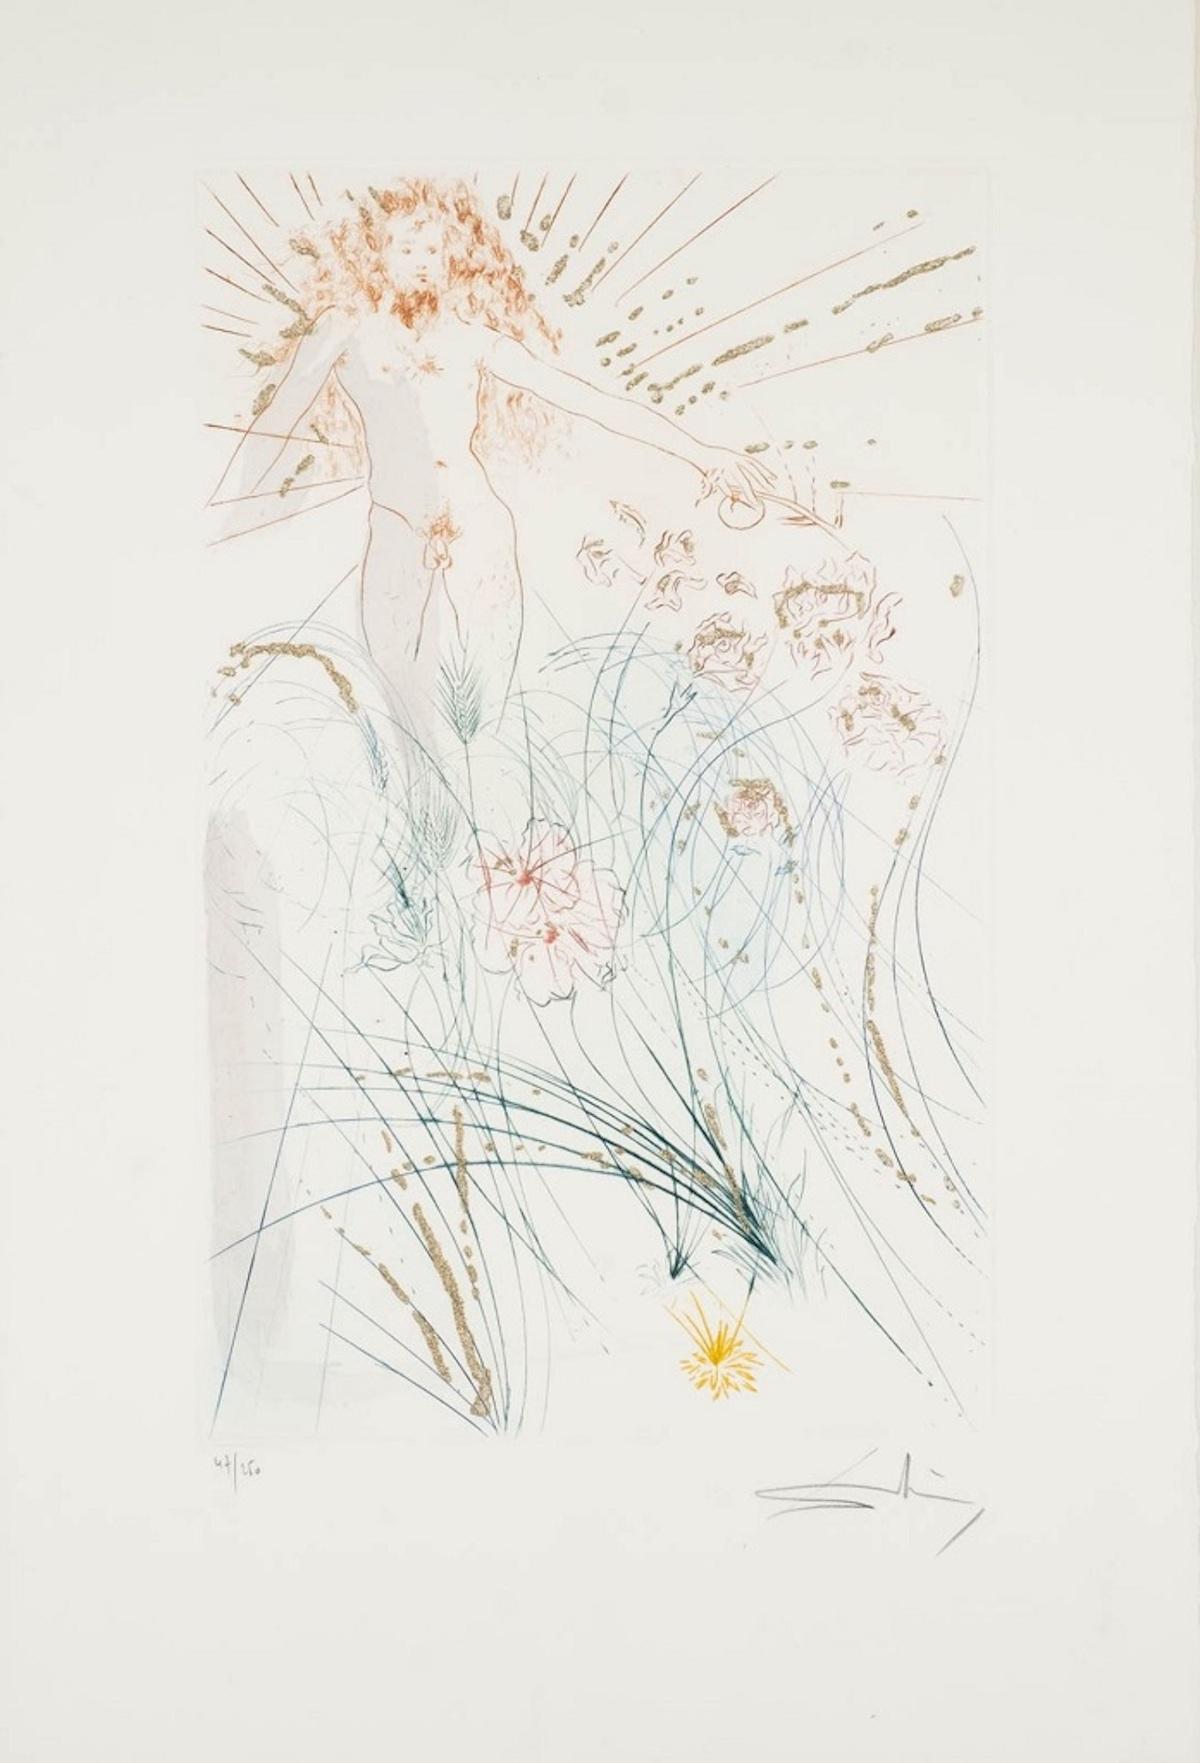 Salvador Dalí Figurative Print - The Beloved Feeds between the Lilies - Original Etching by S. Dalì - 1971